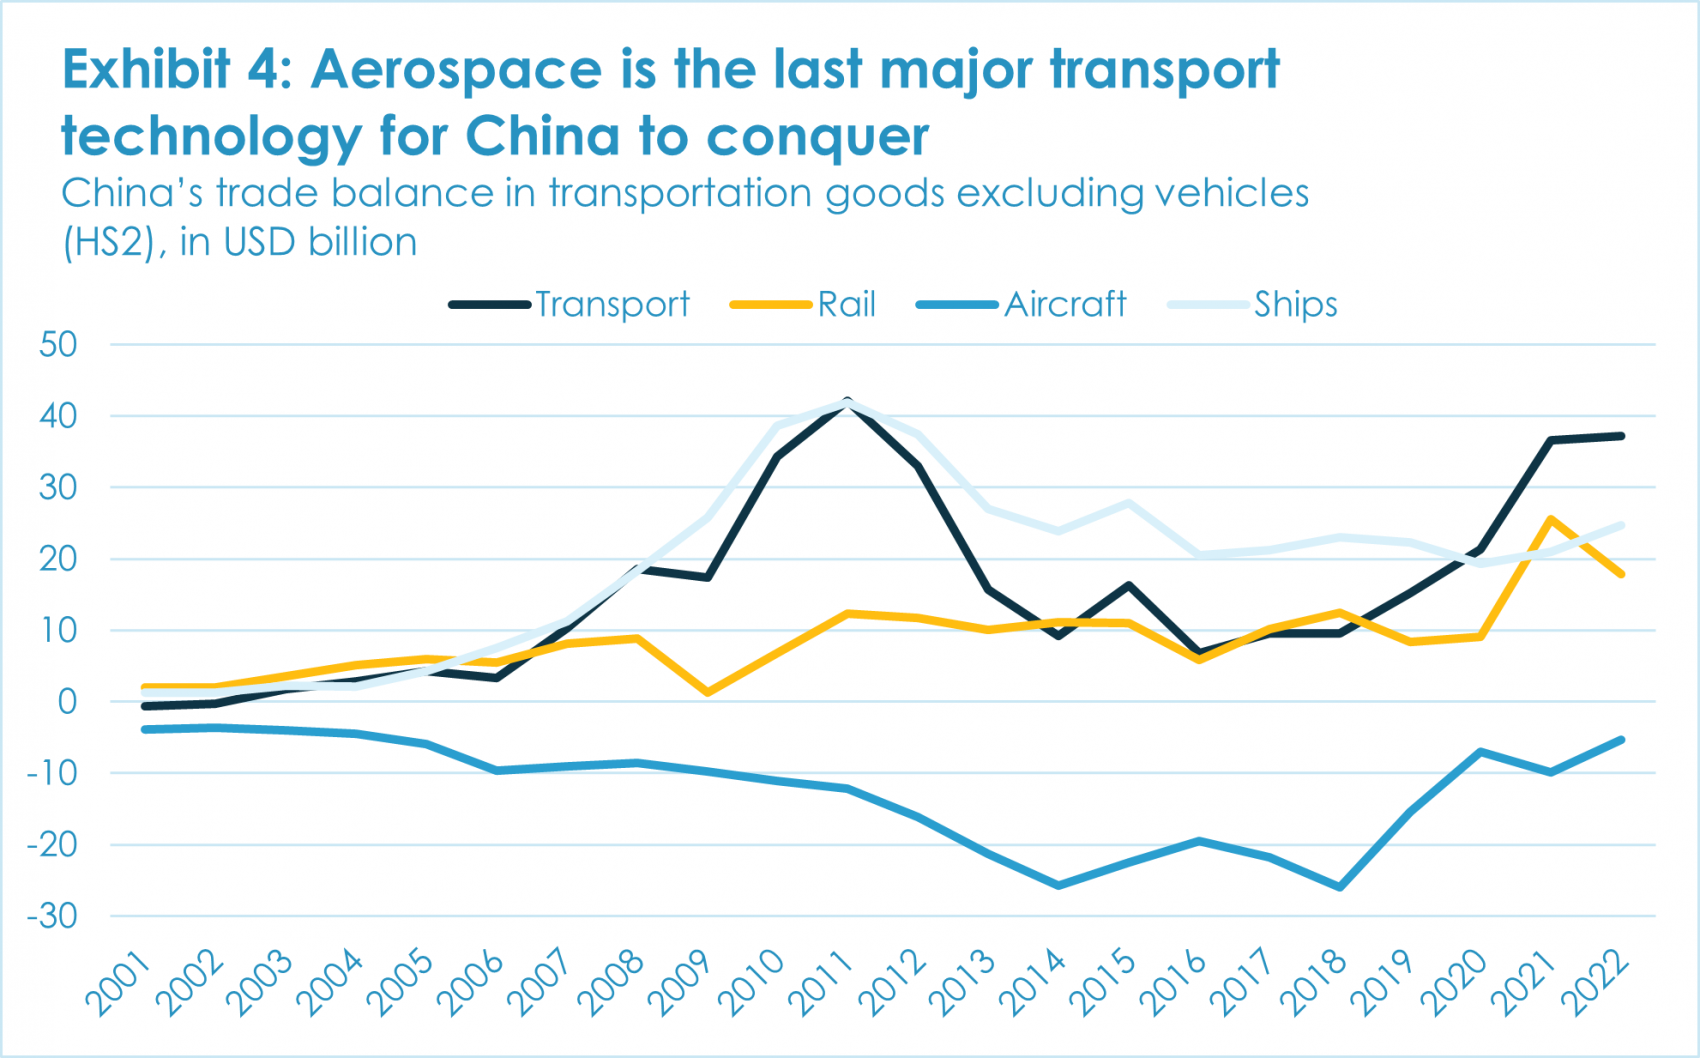 Exhibit 4: Aerospace is the last major transport technology for China to conquer